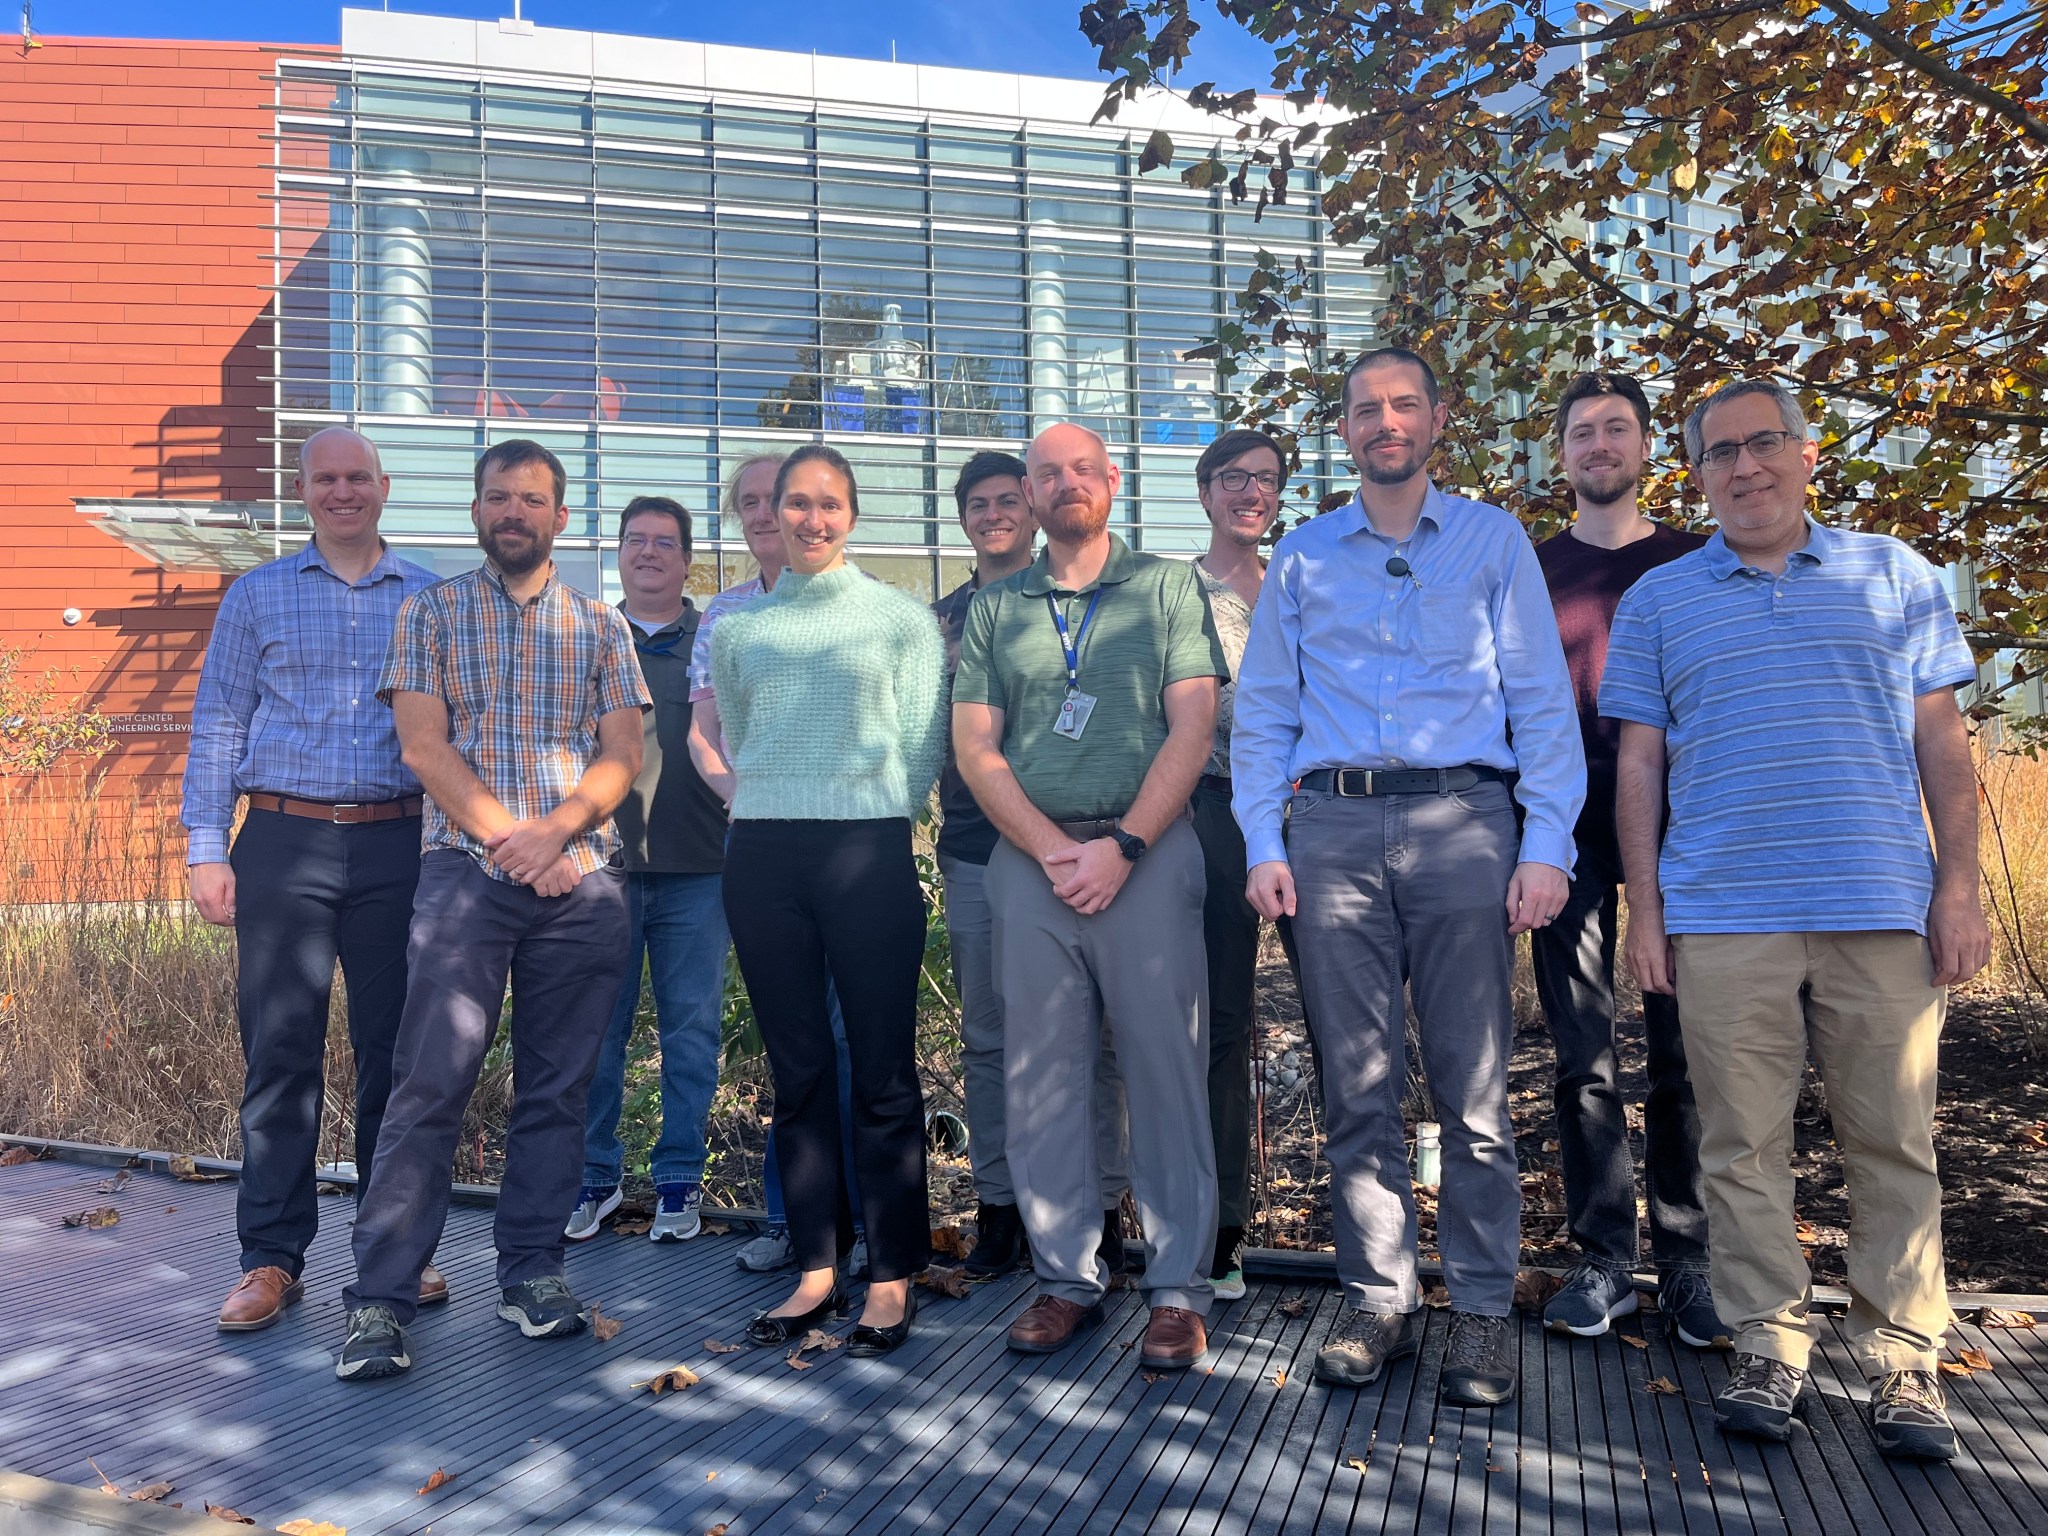 Nearly a dozen NASA researchers associated with developing the Aviary computer modeling tool pose for a photo outside their office building.